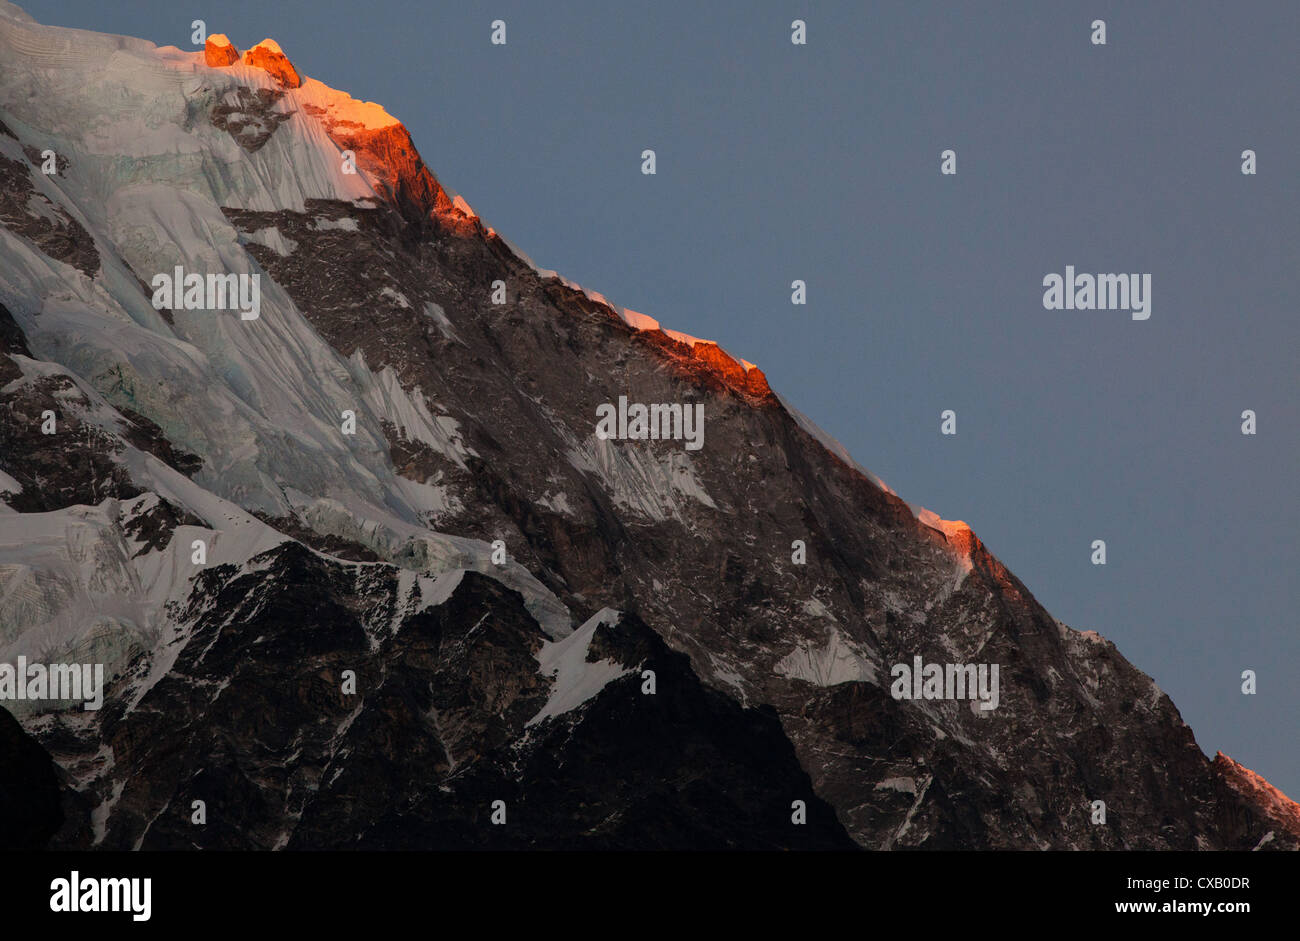 Sunlight hitting a snowcapped mountain along the Langtang Valley, Nepal Stock Photo